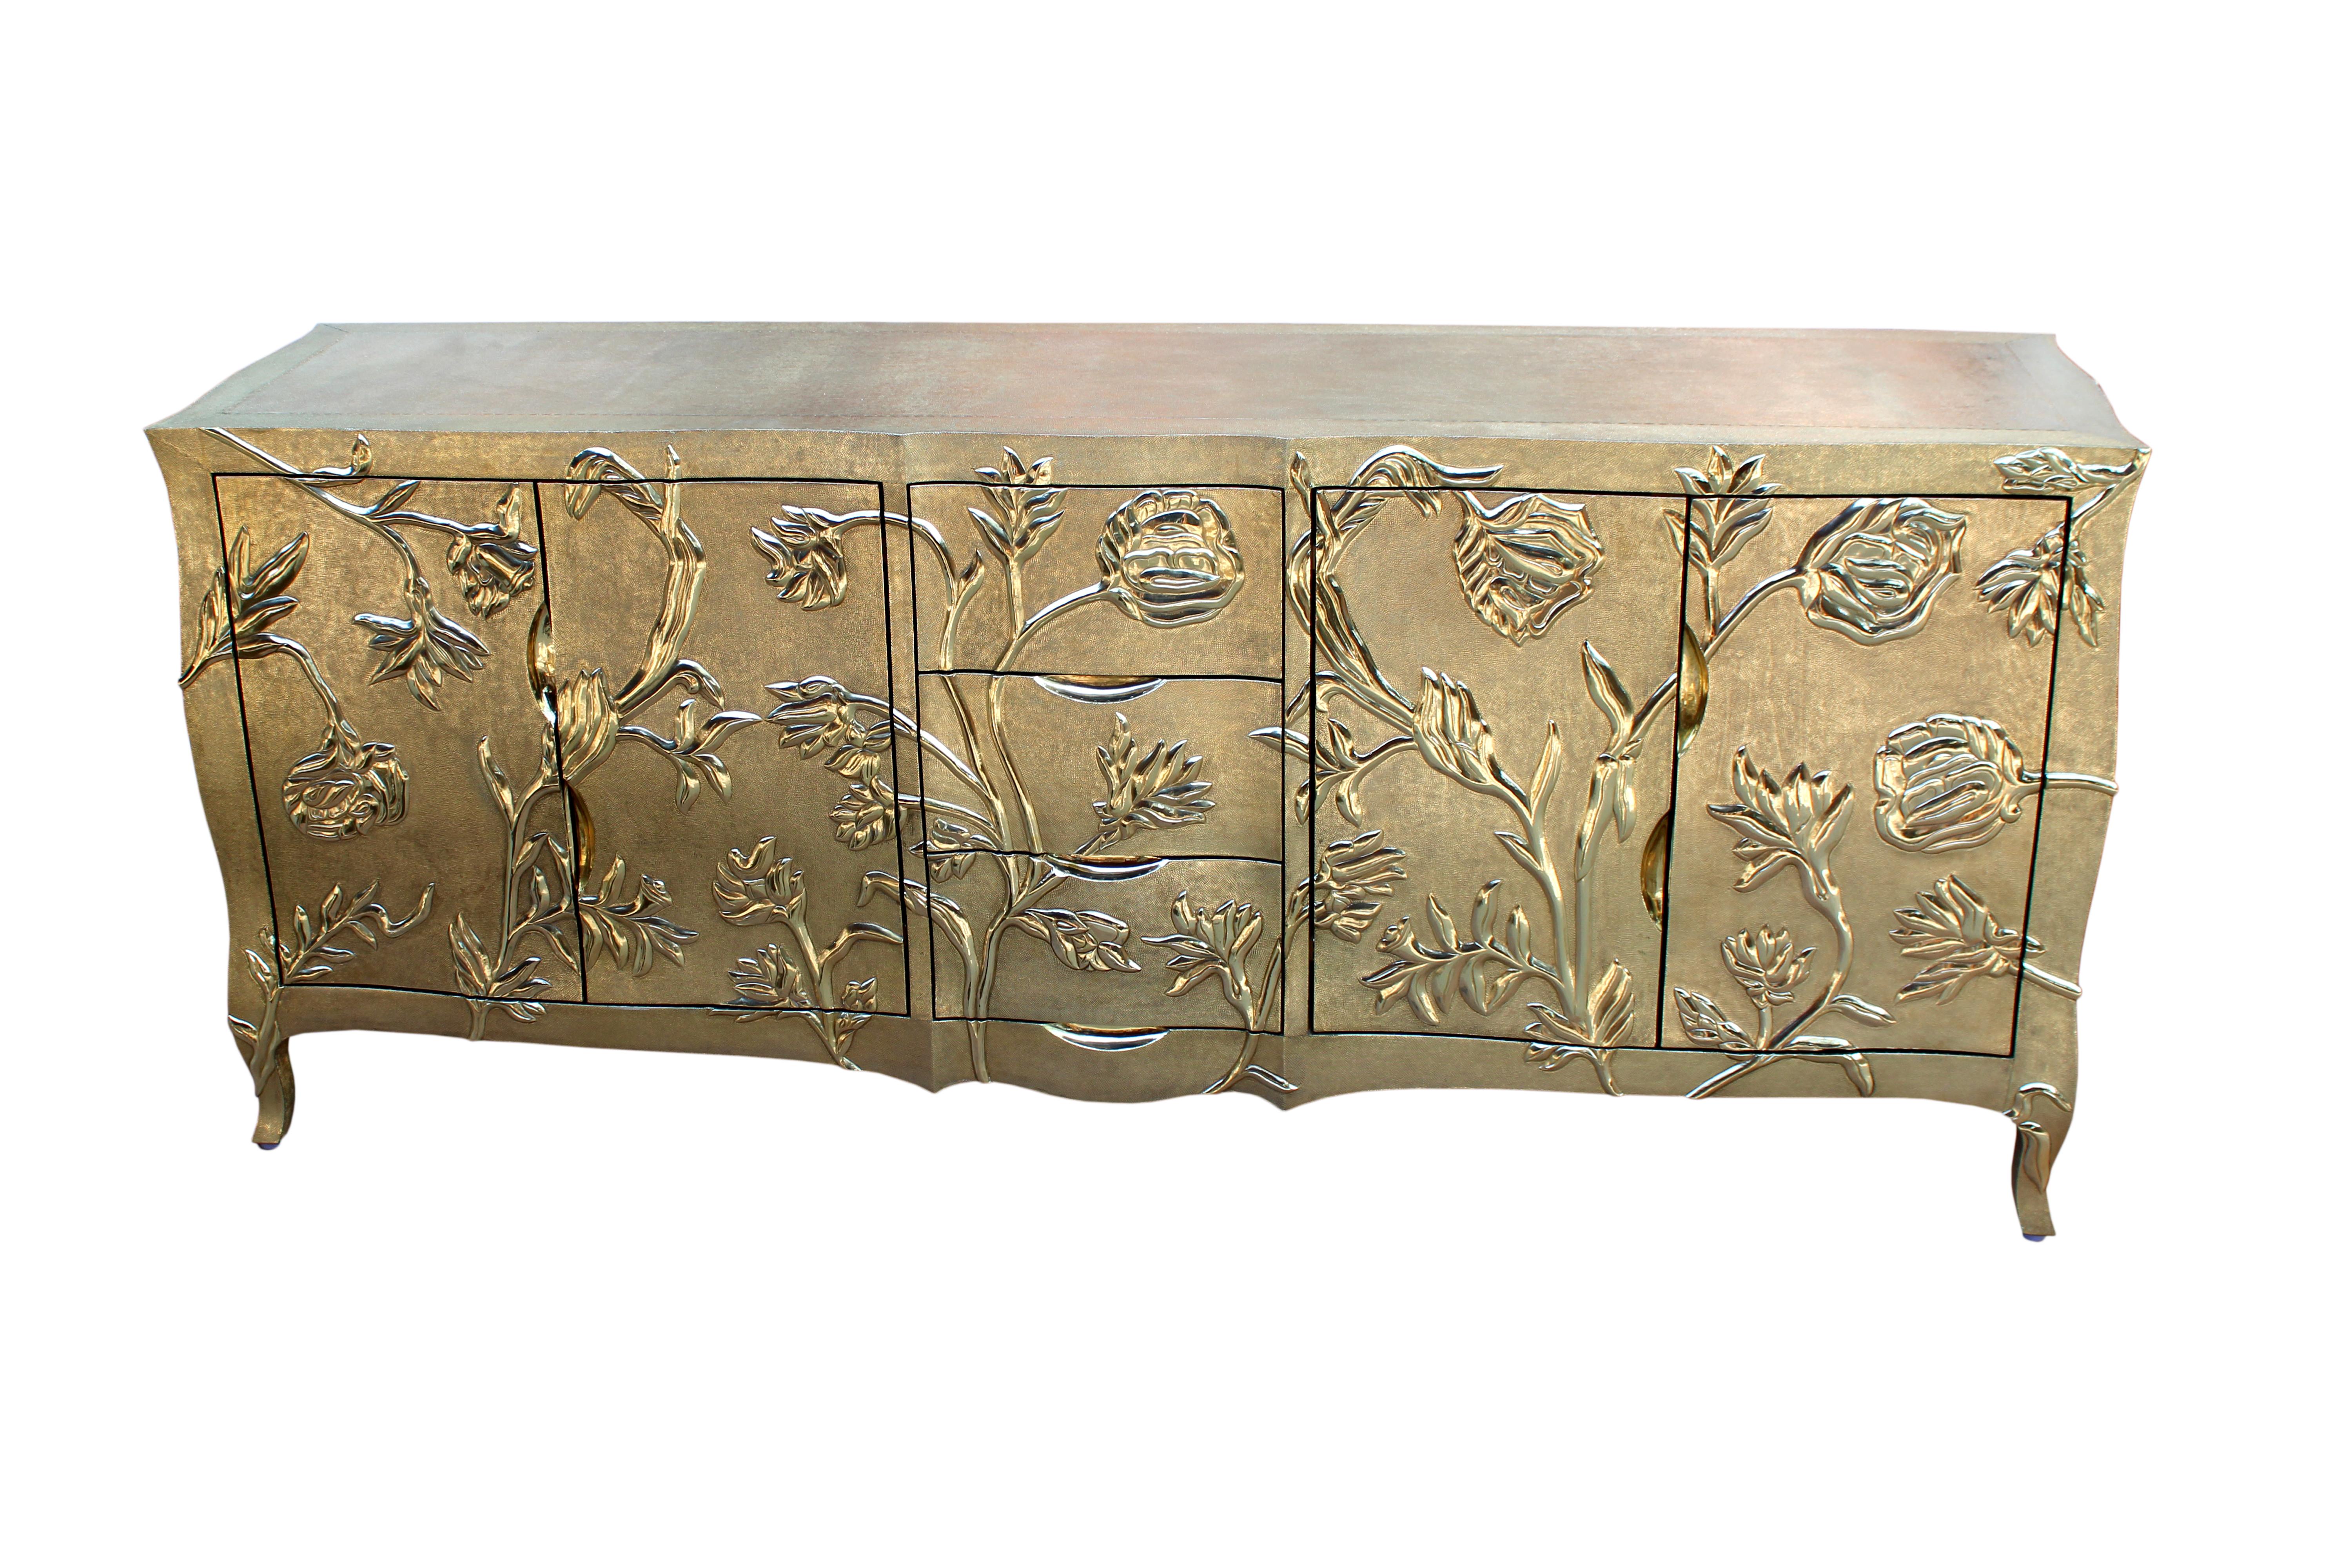 Louise Floral Art Deco Credenza Fine Hammered Brass by Paul Mathieu For Sale 1